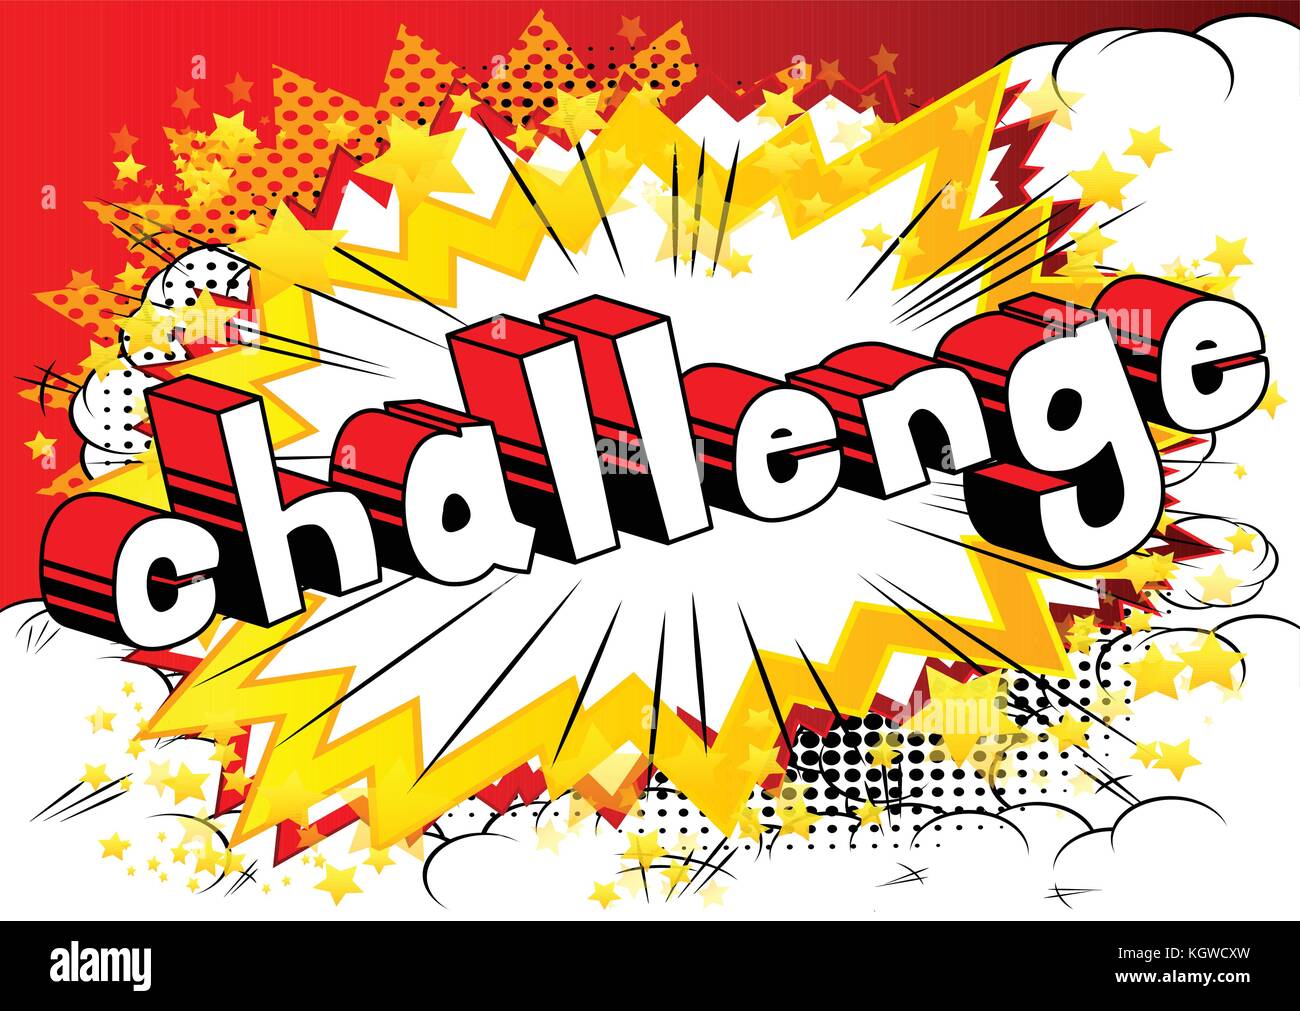 Challenge - Comic book style word on abstract background Stock Vector ...